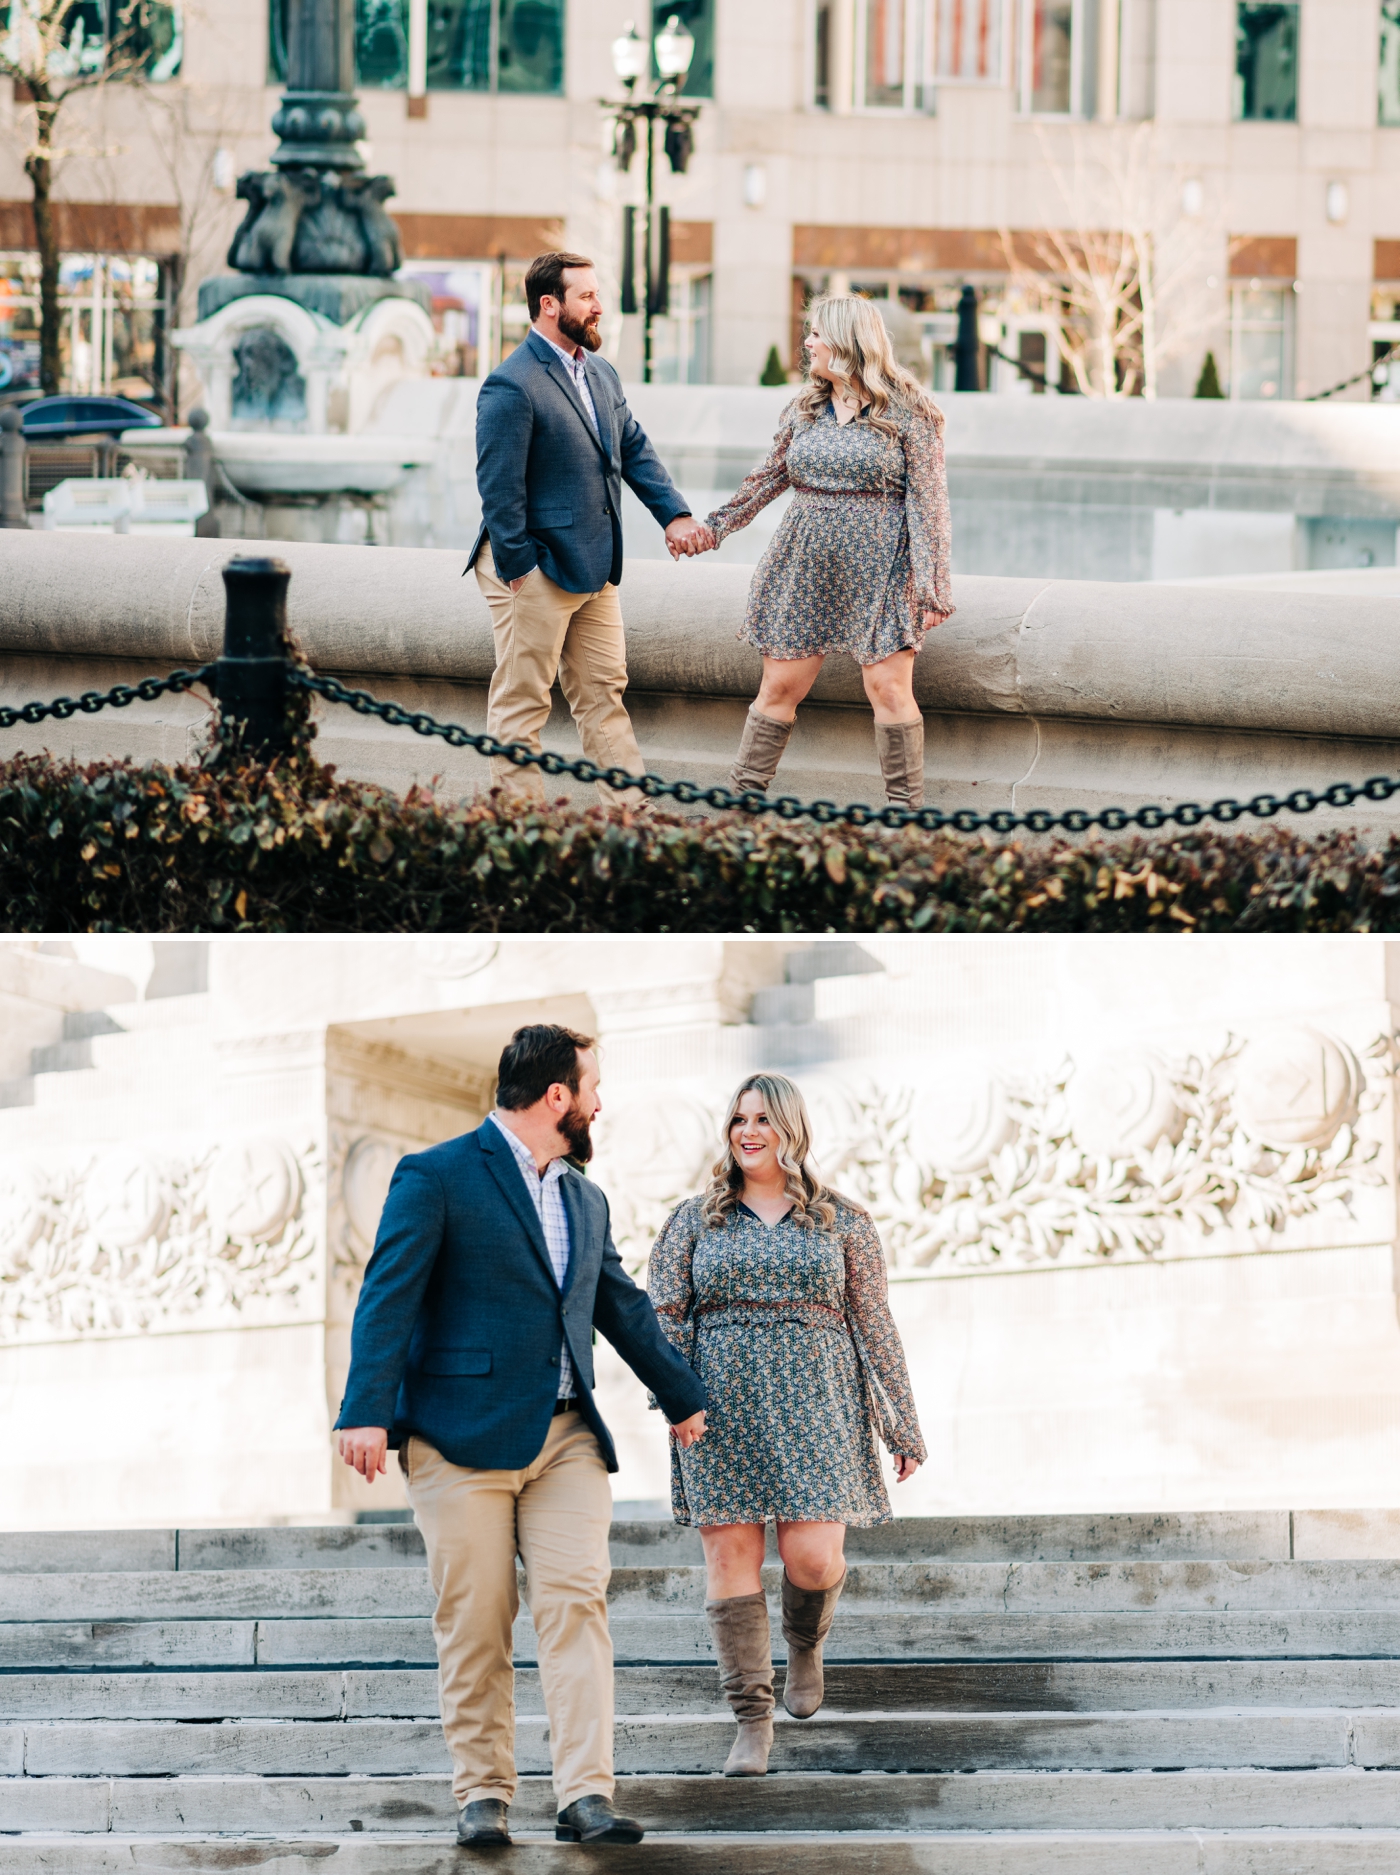 Engagement session at Indiana Wold War Memorial